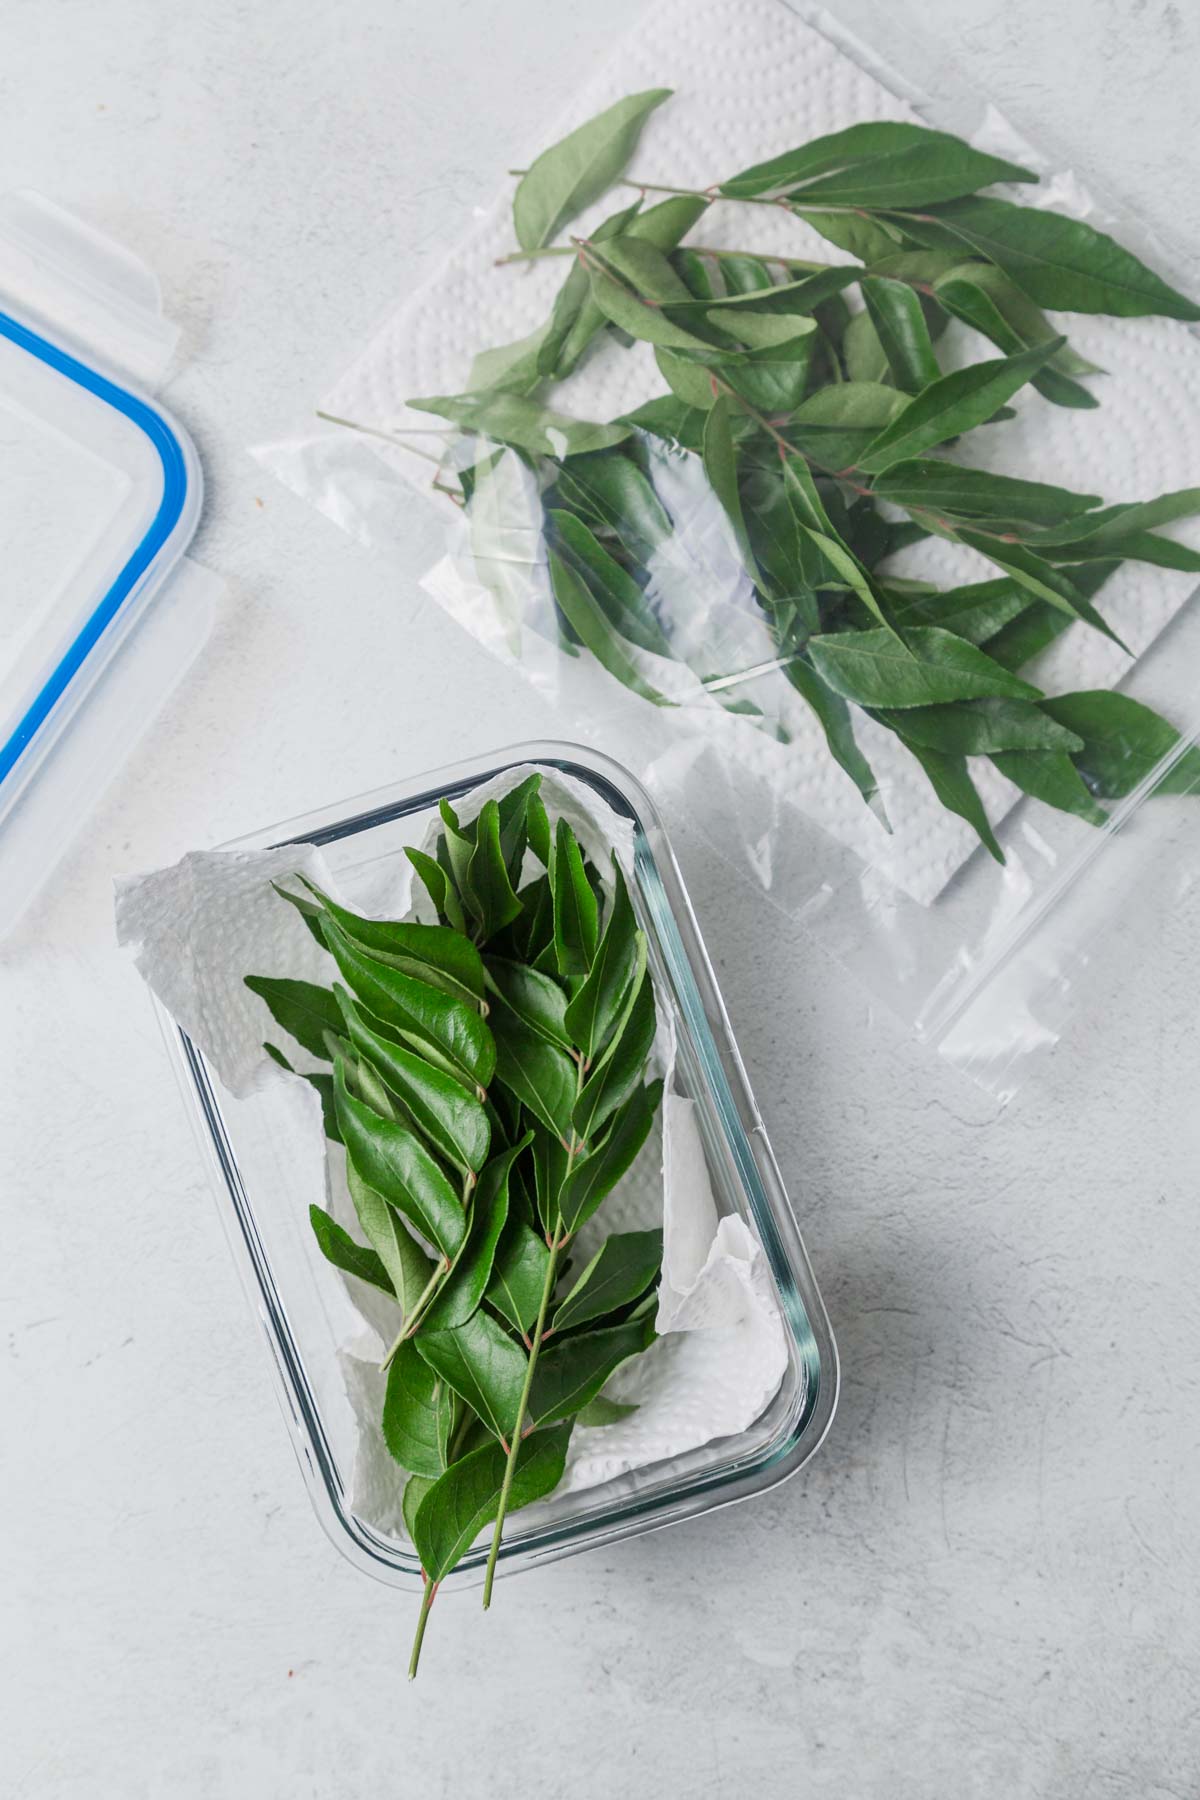 storing curry leaves in air tight container or bag.